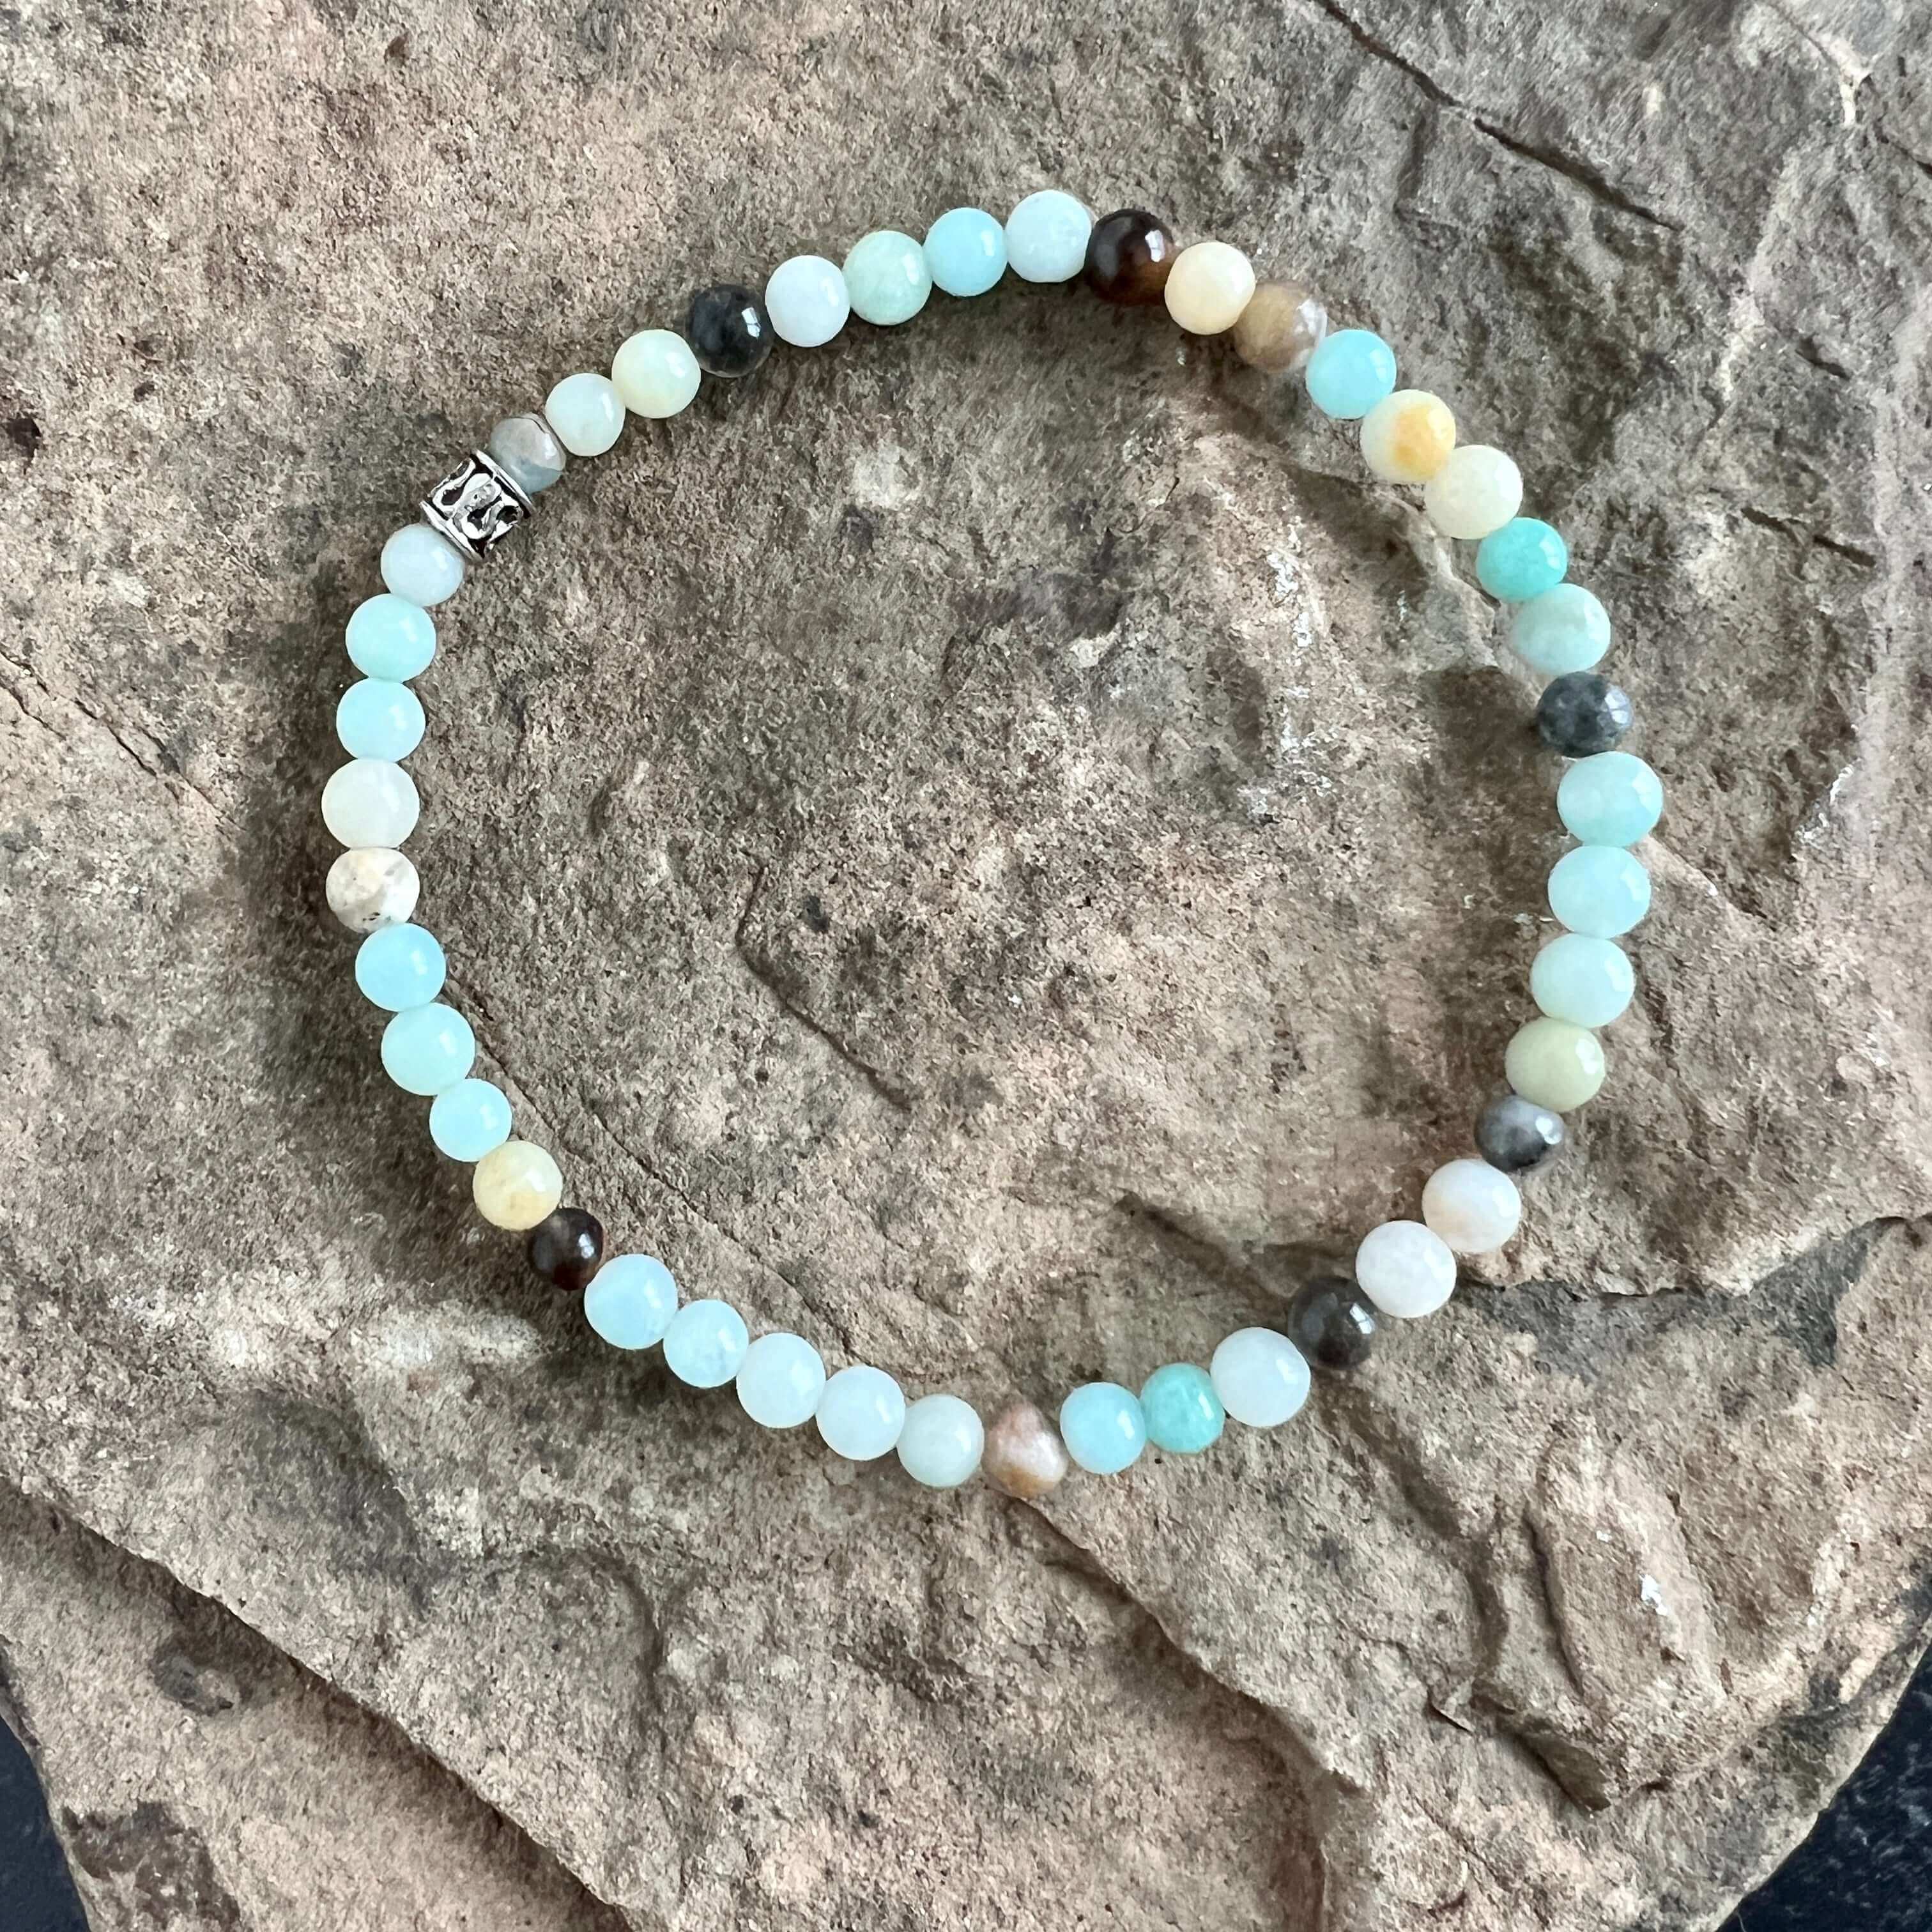 Black Gold Amazonite Bracelet This bracelet is made with high-quality Black Gold Amazonite stones which bring inspiration and calm to the wearer. Zodiac Sign: Virgo. Chakras: Heart and Throat. Handmade with authentic crystals and gemstones in Minneapolis,